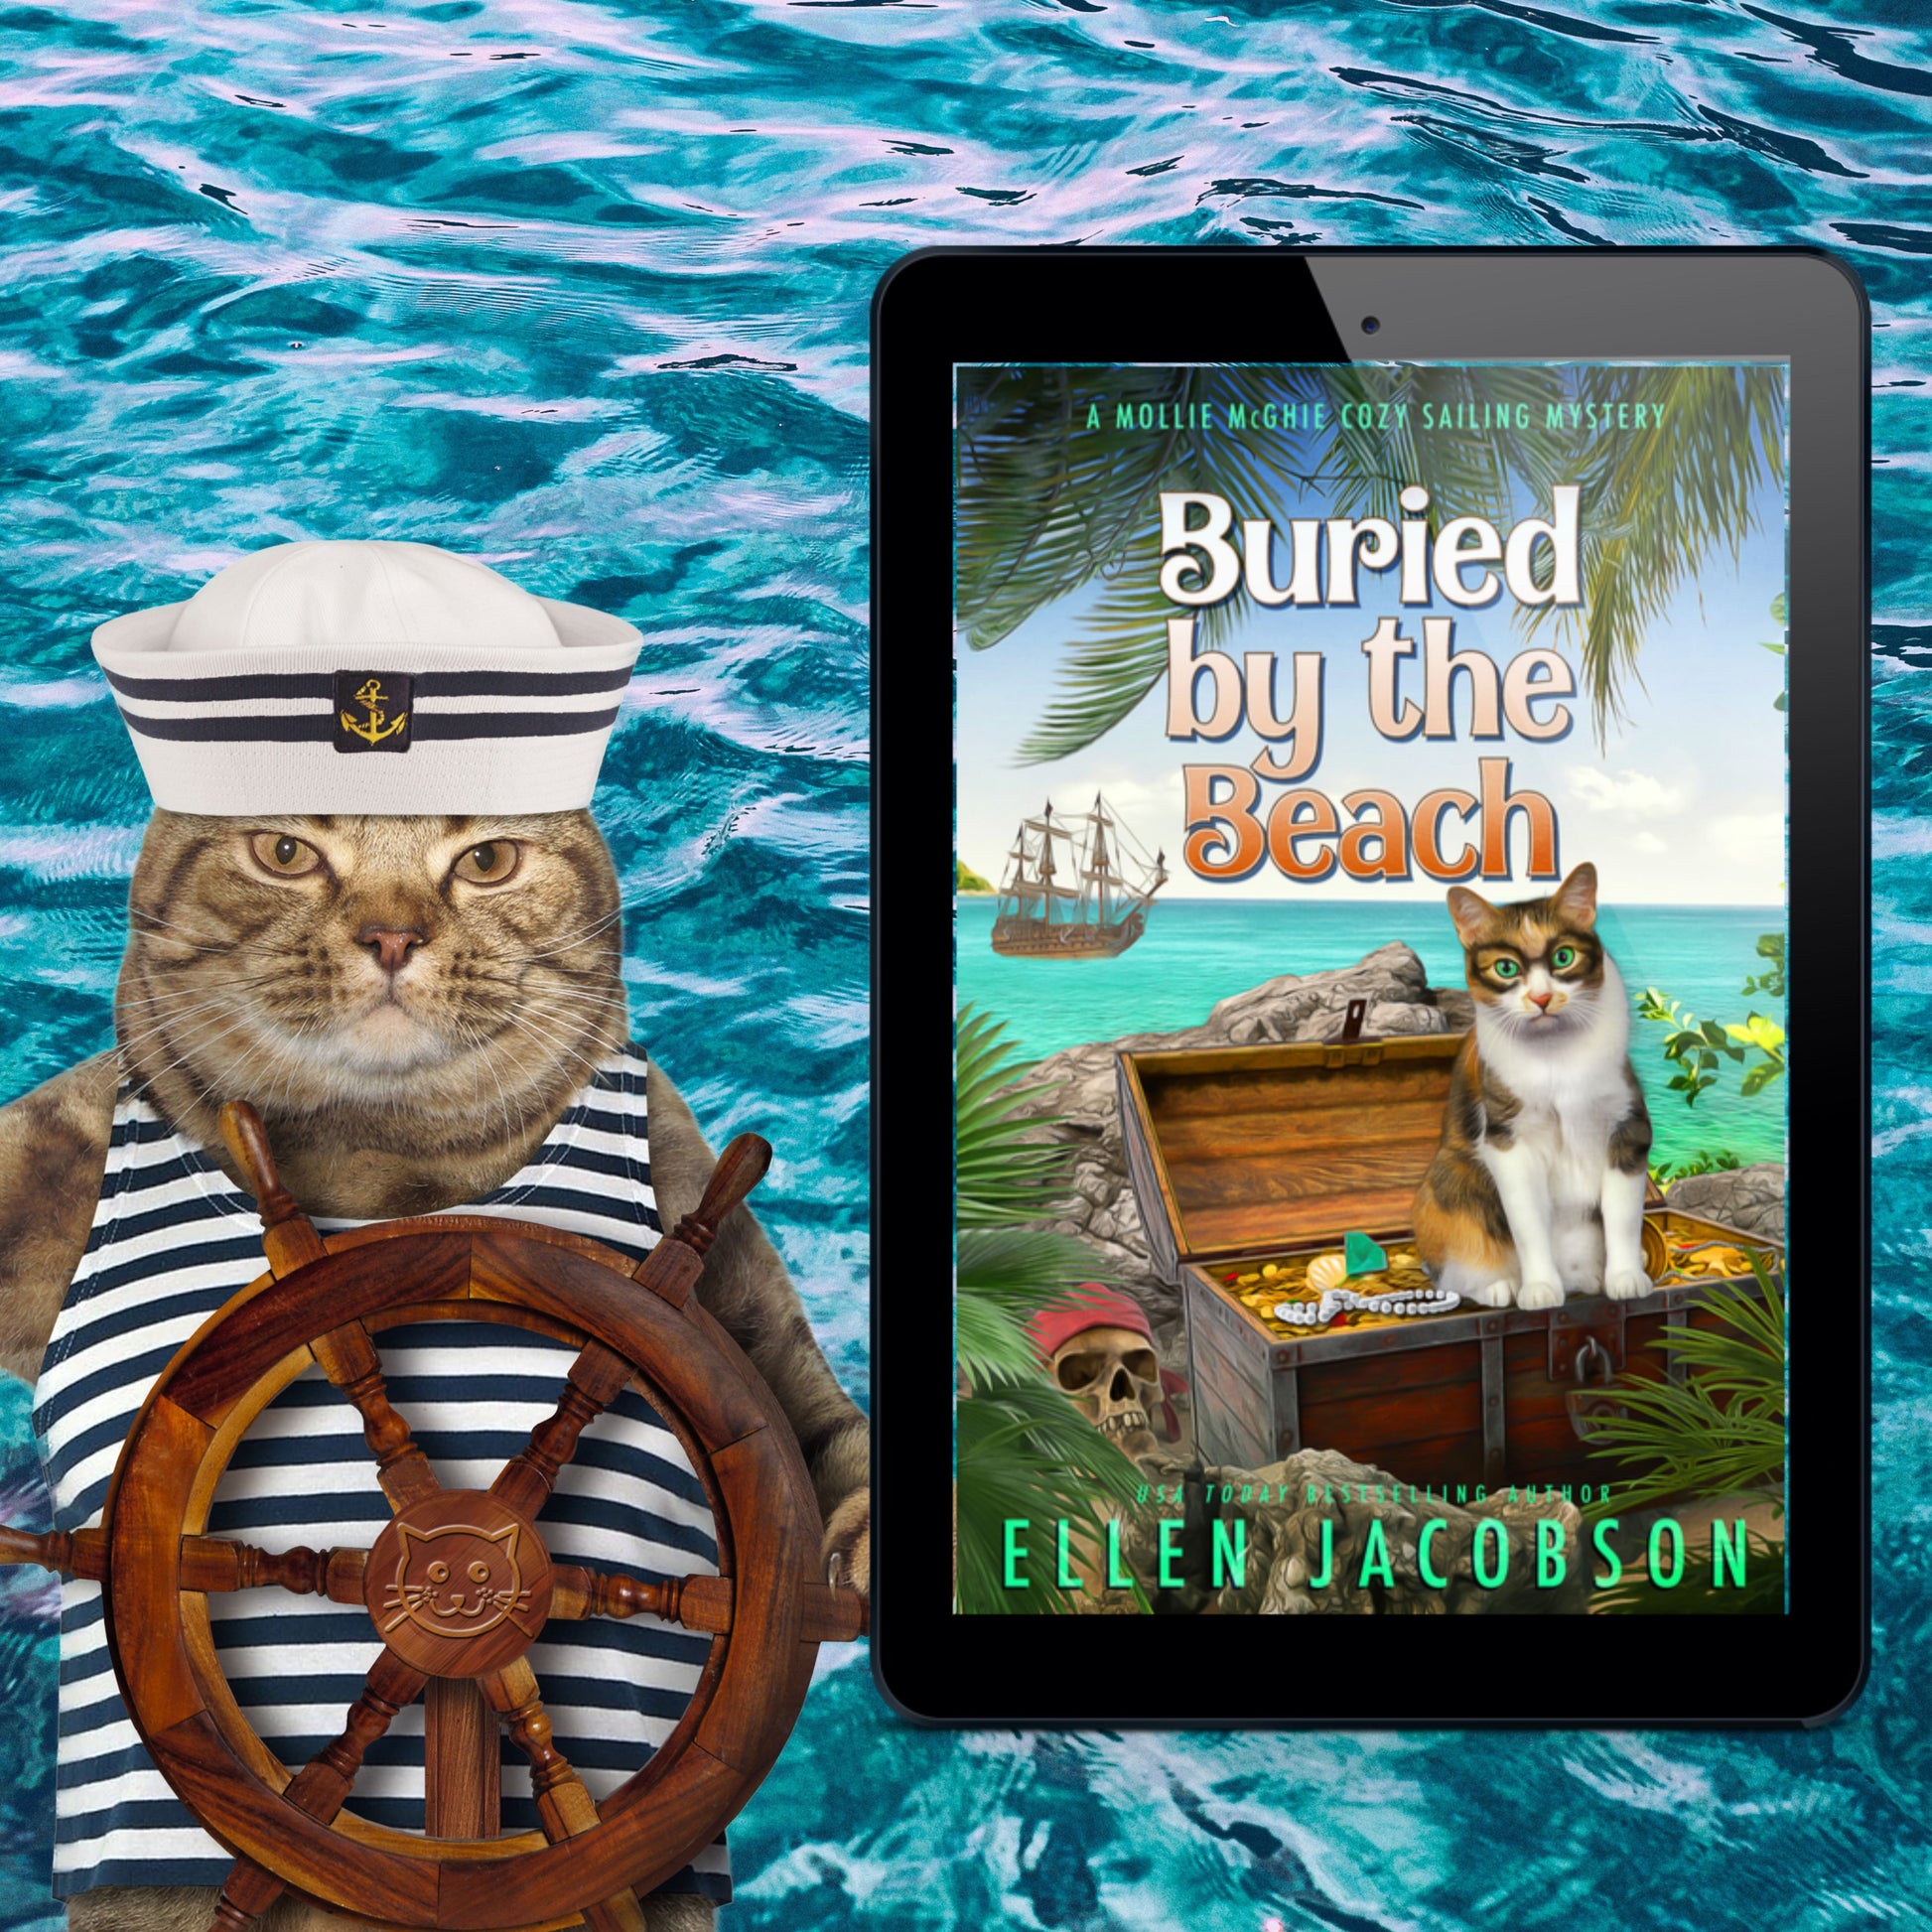 Buried by the Beach (Mollie McGhie Cozy Mystery Short Story) Ebook Cover with Funny Nautical Cat 